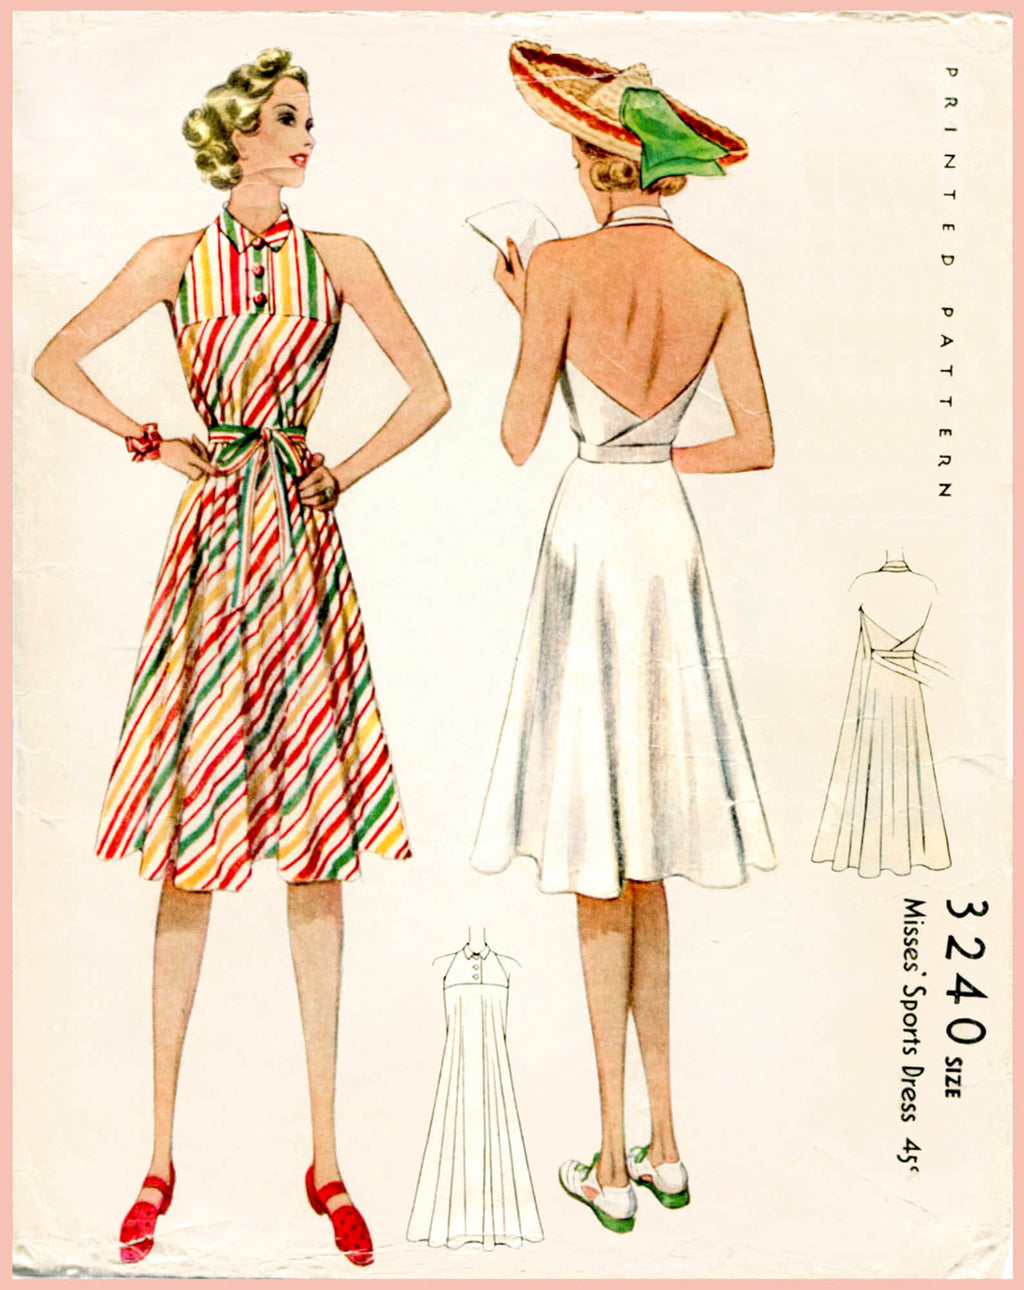 McCall 3240 1930s sun dress vintage sewing pattern